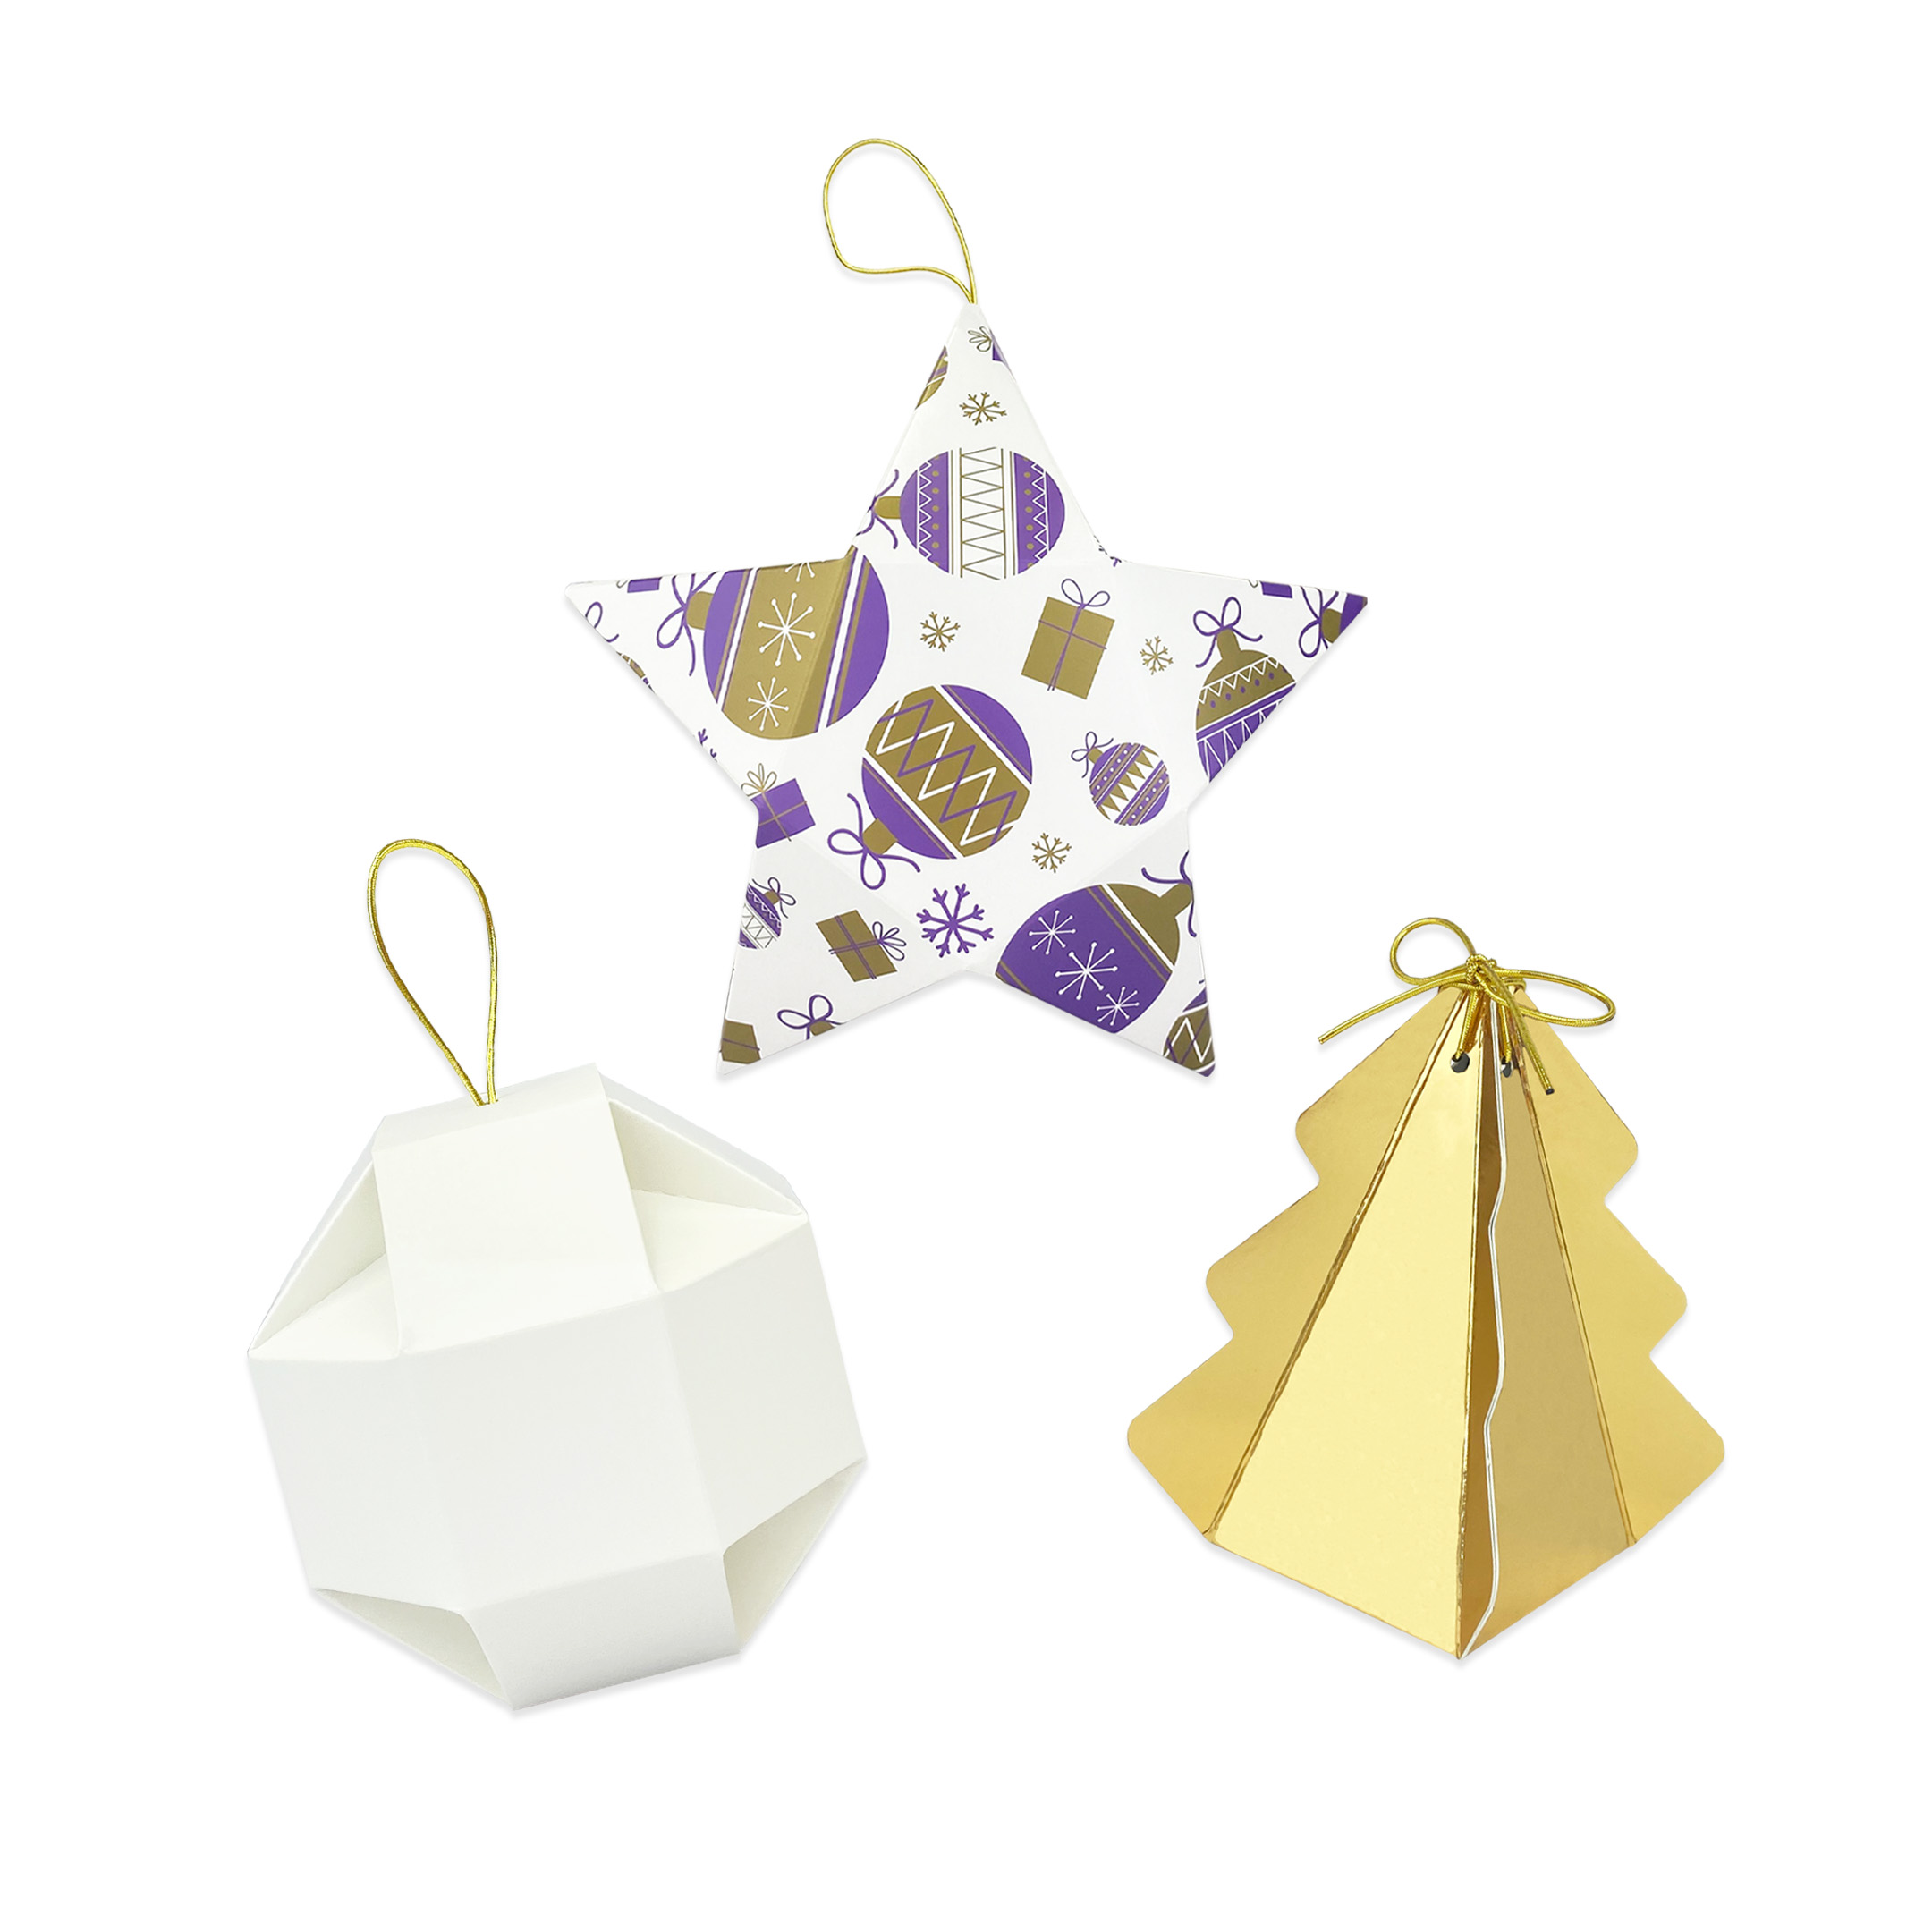 Decorative Christmas Packaging favours to place on the Christmas tree or dinning room table. Star in purple bauble, bauble in white, tree in bright gold